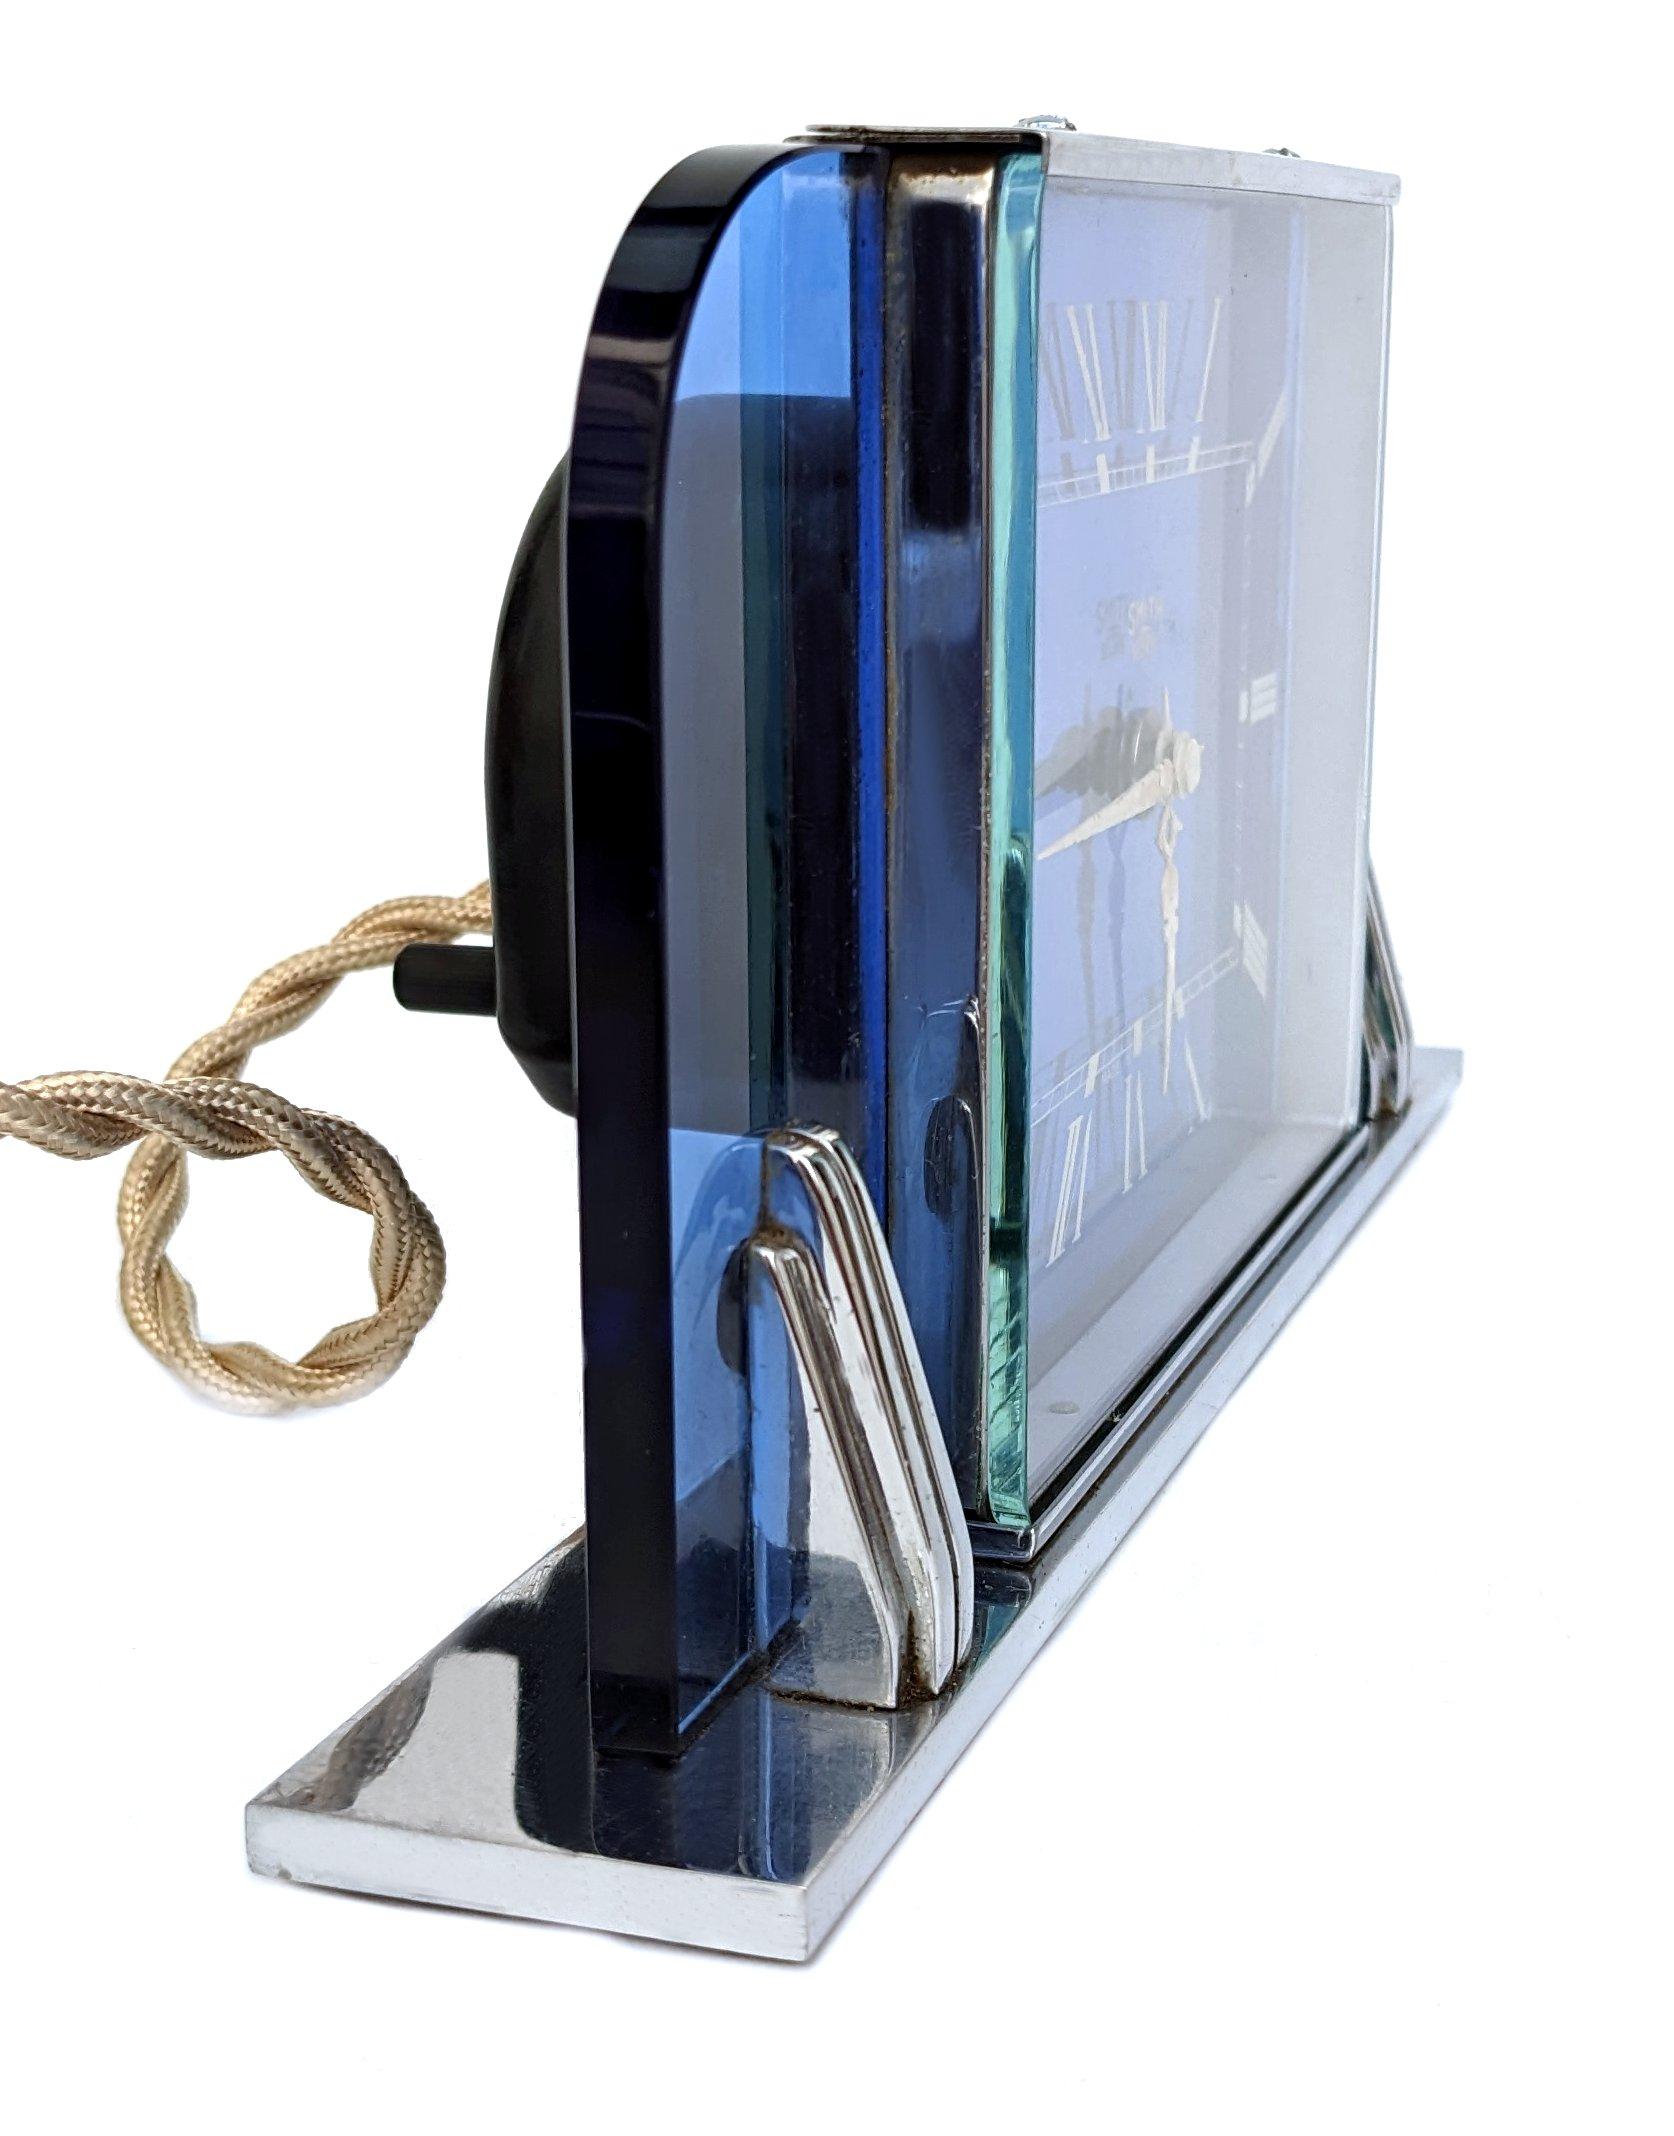 20th Century Art Deco Modernist Blue Glass Electric Clock By Smiths Clockmakers, c1930 For Sale